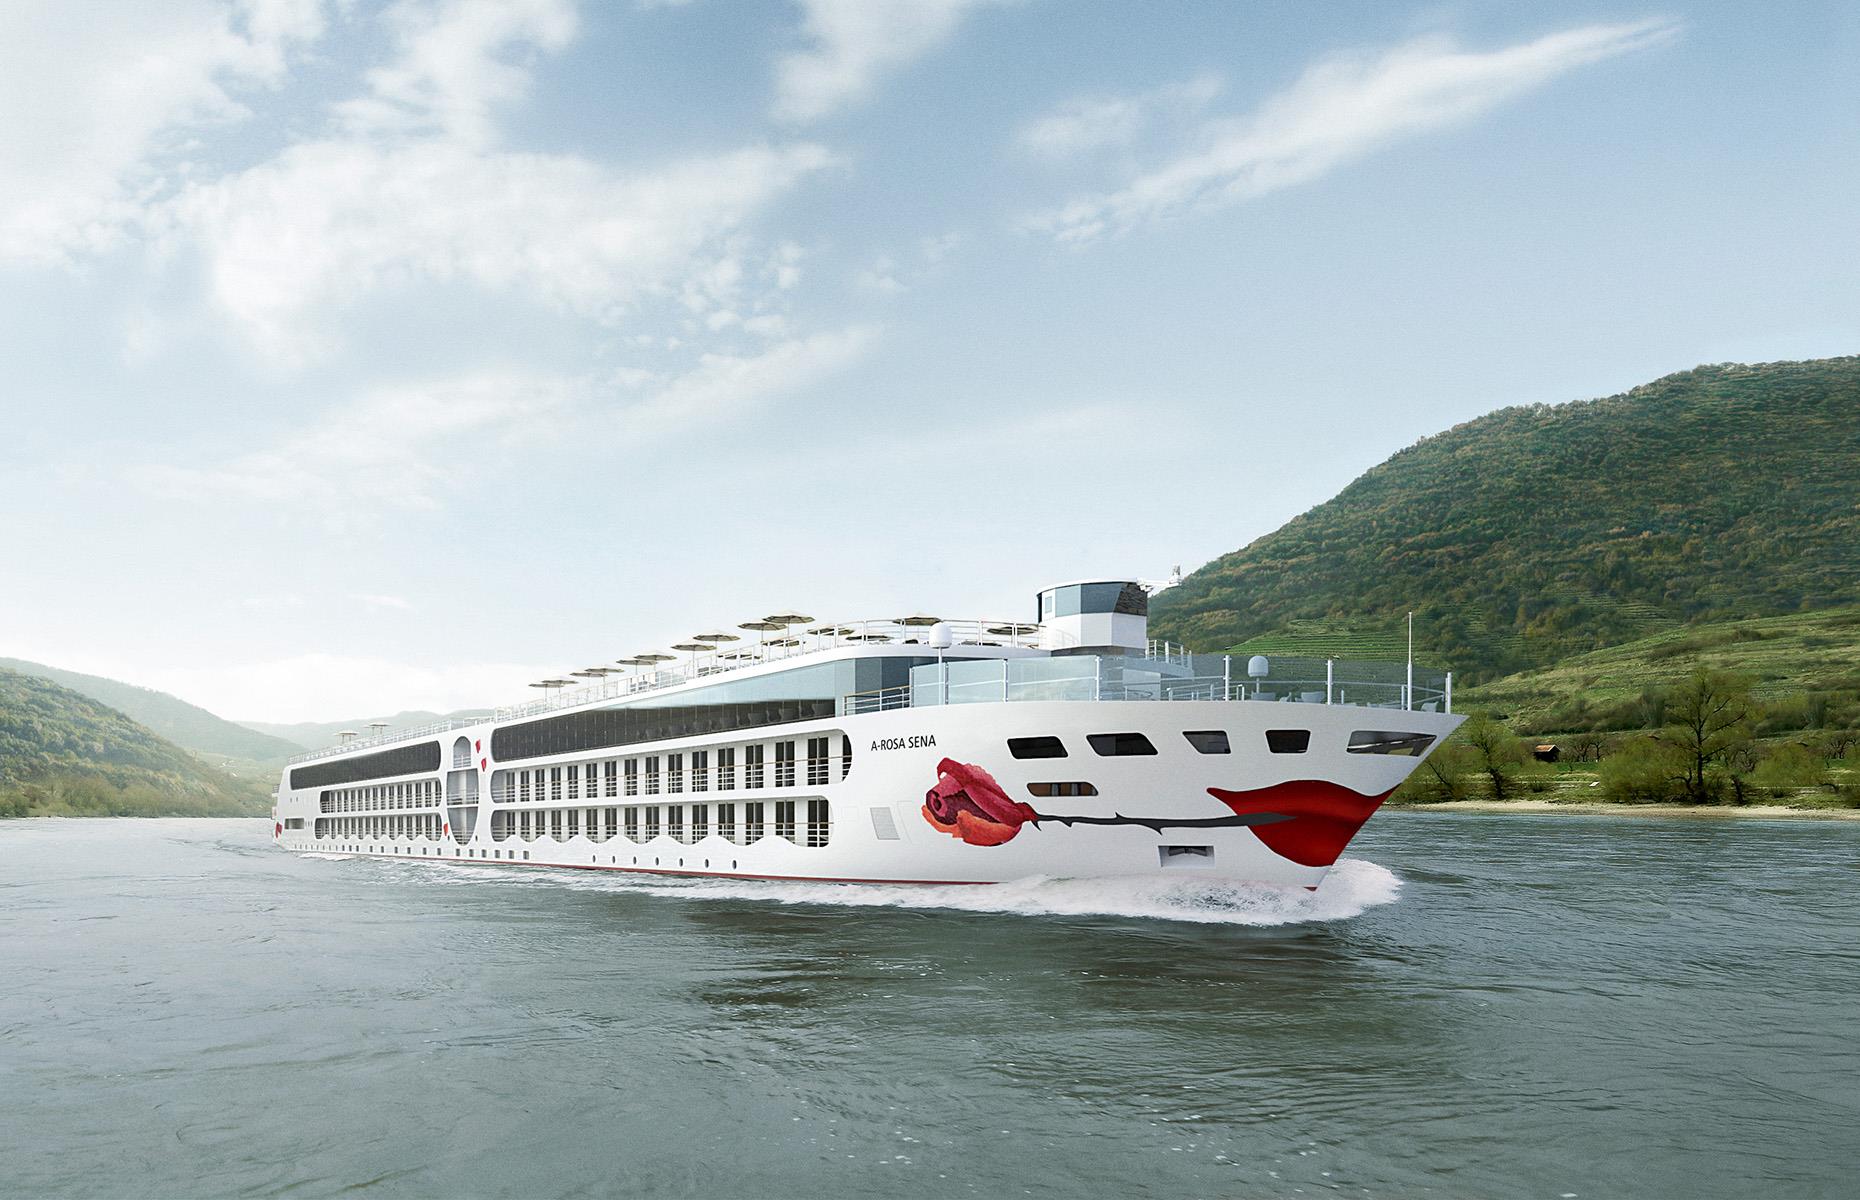 <p>River cruises are often seen as the preserve of couples, but change is afoot. In 2022, A-ROSA River Cruises launched <a href="https://www.arosa-cruises.com/river-cruises/a-rosa-fleet/a-rosa-sena.html">A-ROSA SENA</a>, the only river cruise ship in Europe to have a dedicated kids’ club room. AmaWaterways’ AmaMagna has a theater area where children (and big kids) can watch movies and play games consoles, and Uniworld’s Generation Collection cruises offer kid-friendly activities and excursions.</p>